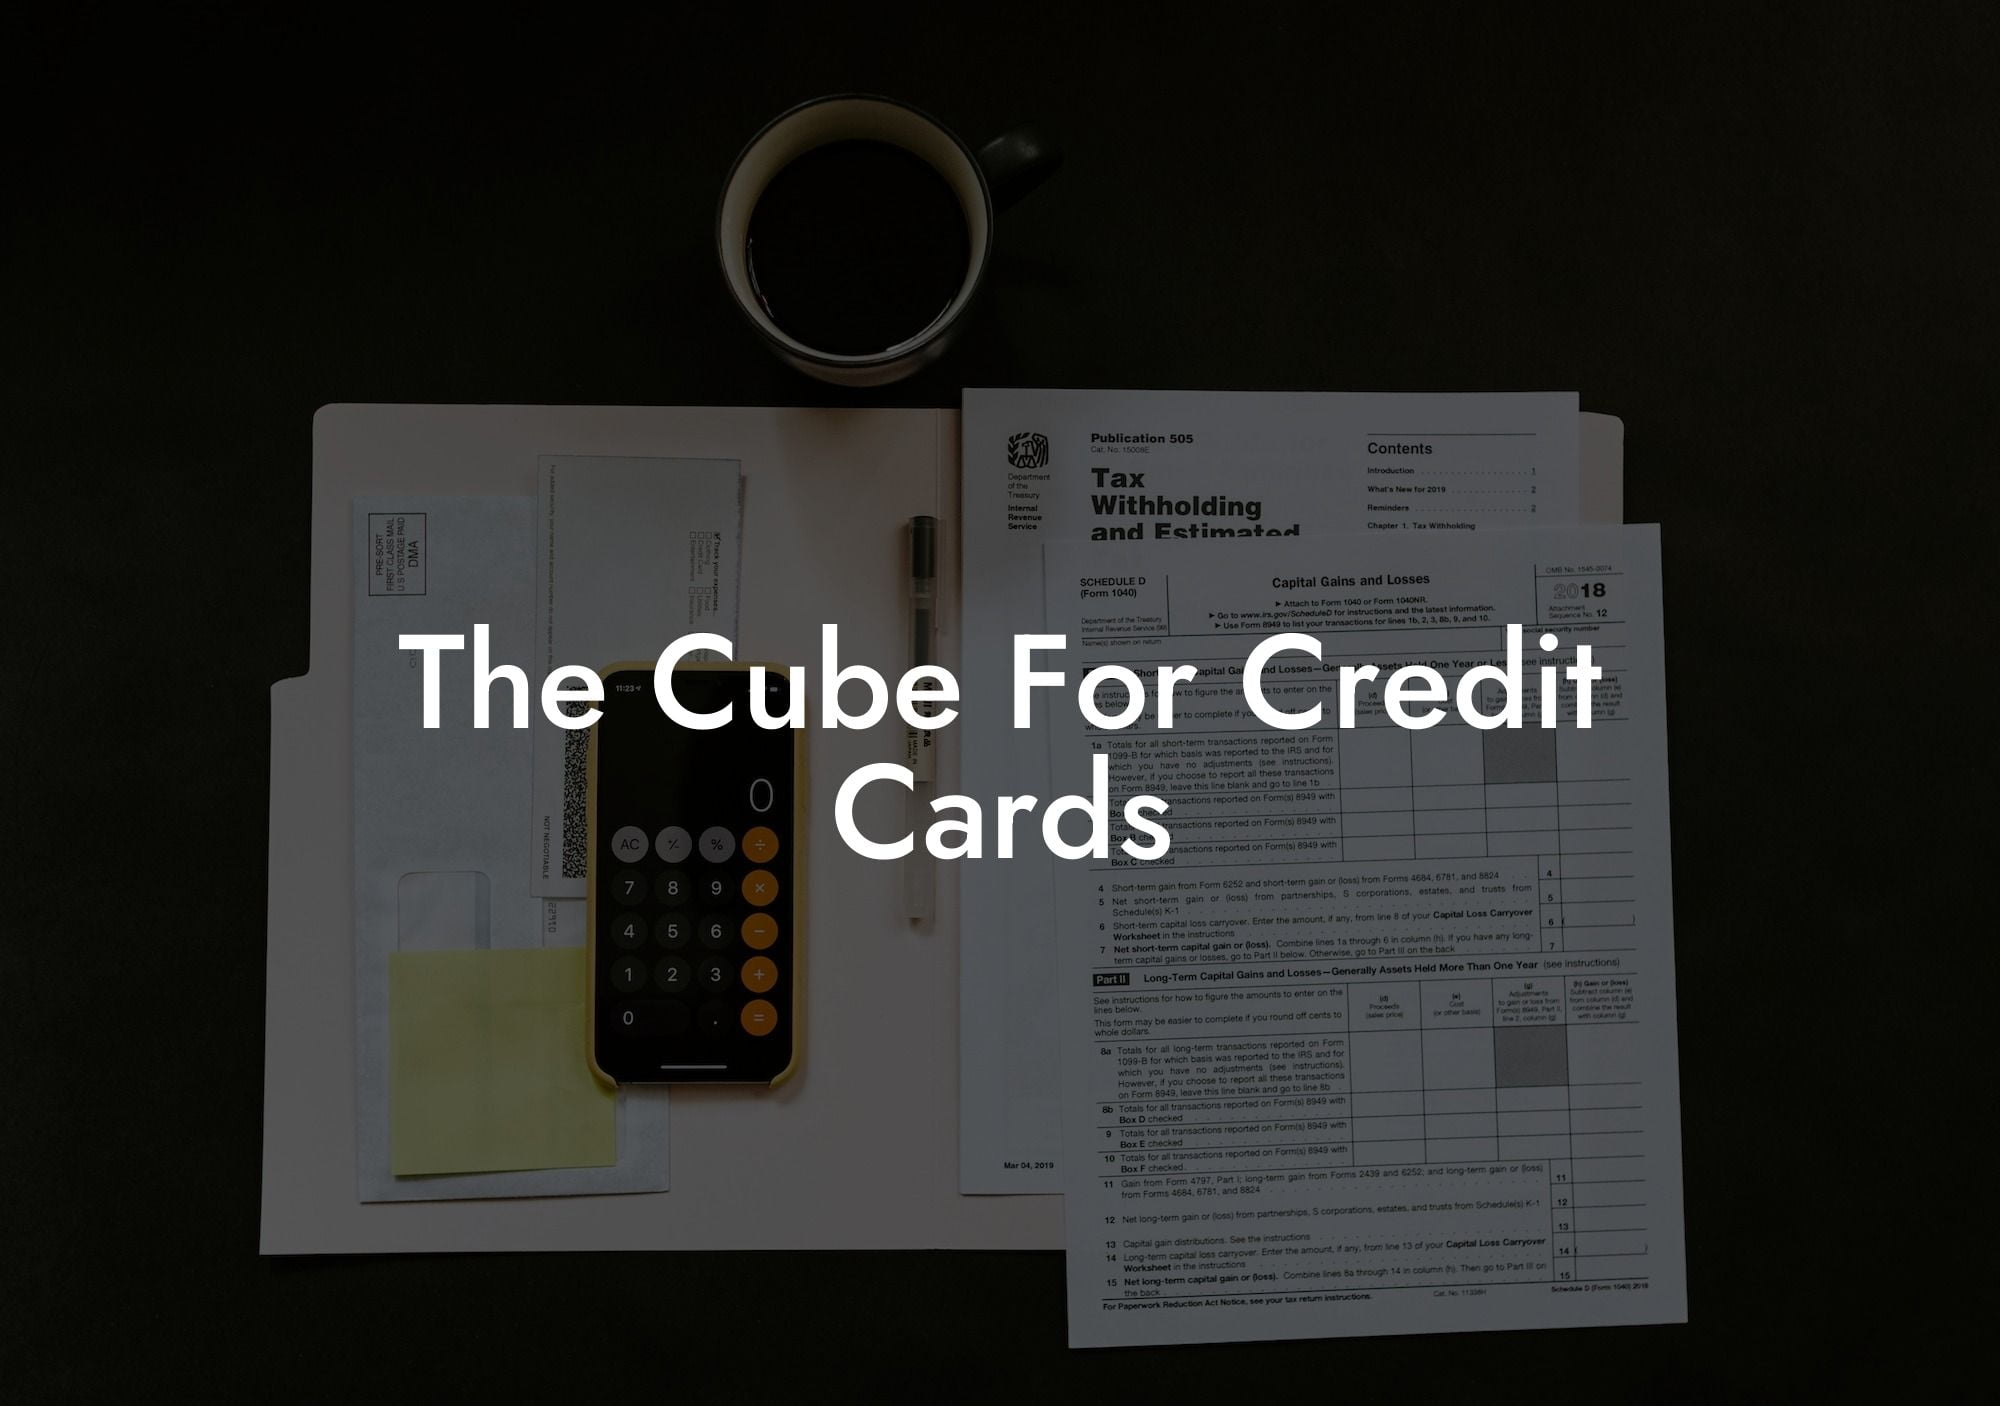 The Cube For Credit Cards